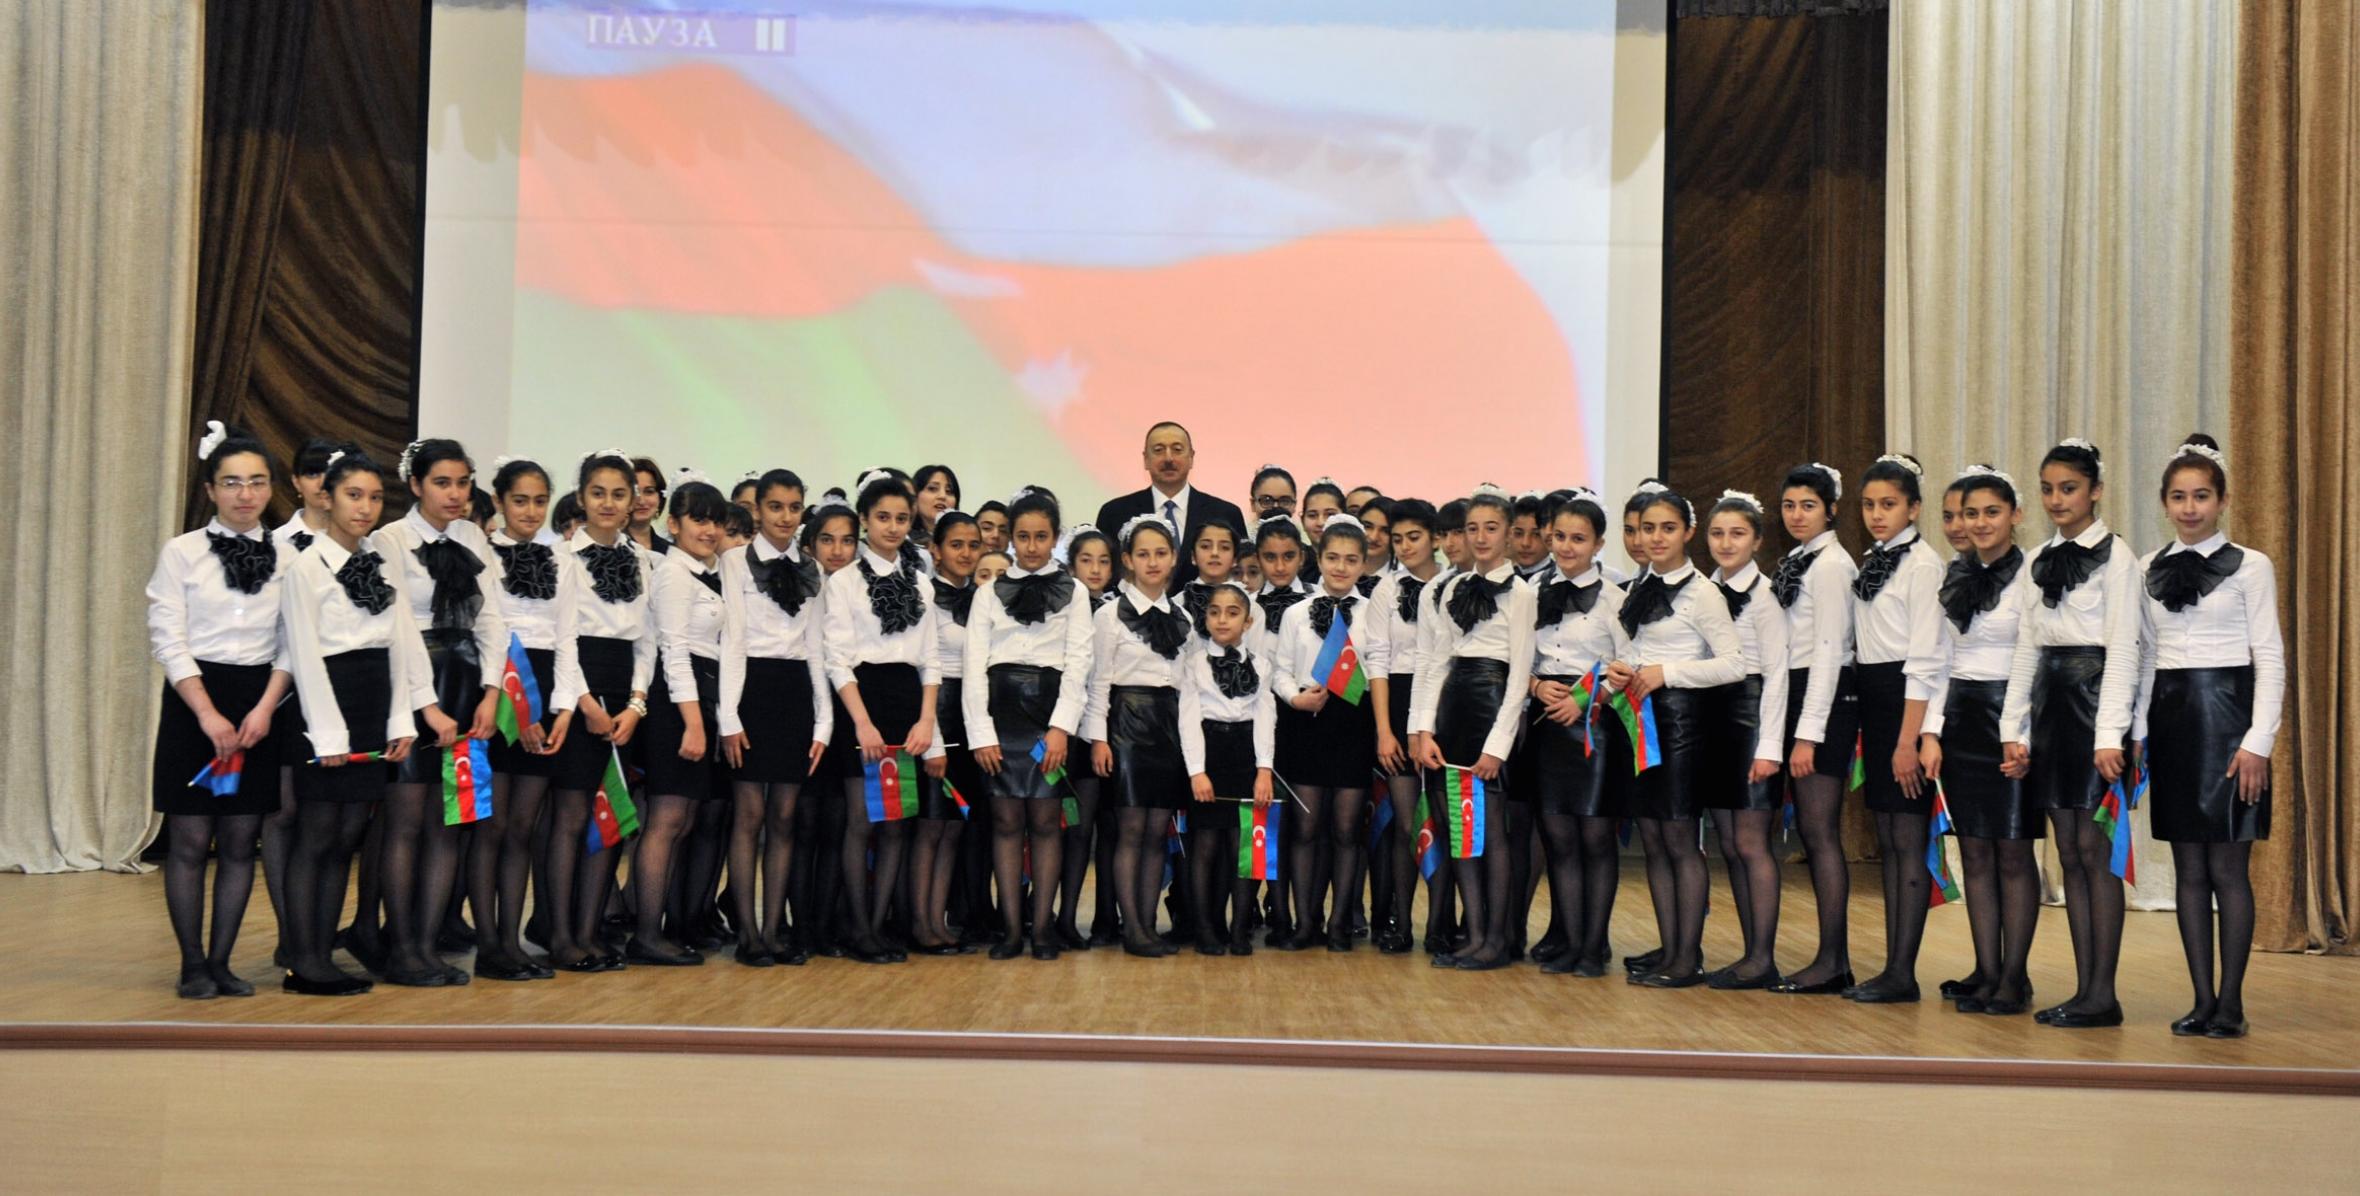 Ilham Aliyev reviewed the Culture Center in Lankaran after major overhaul